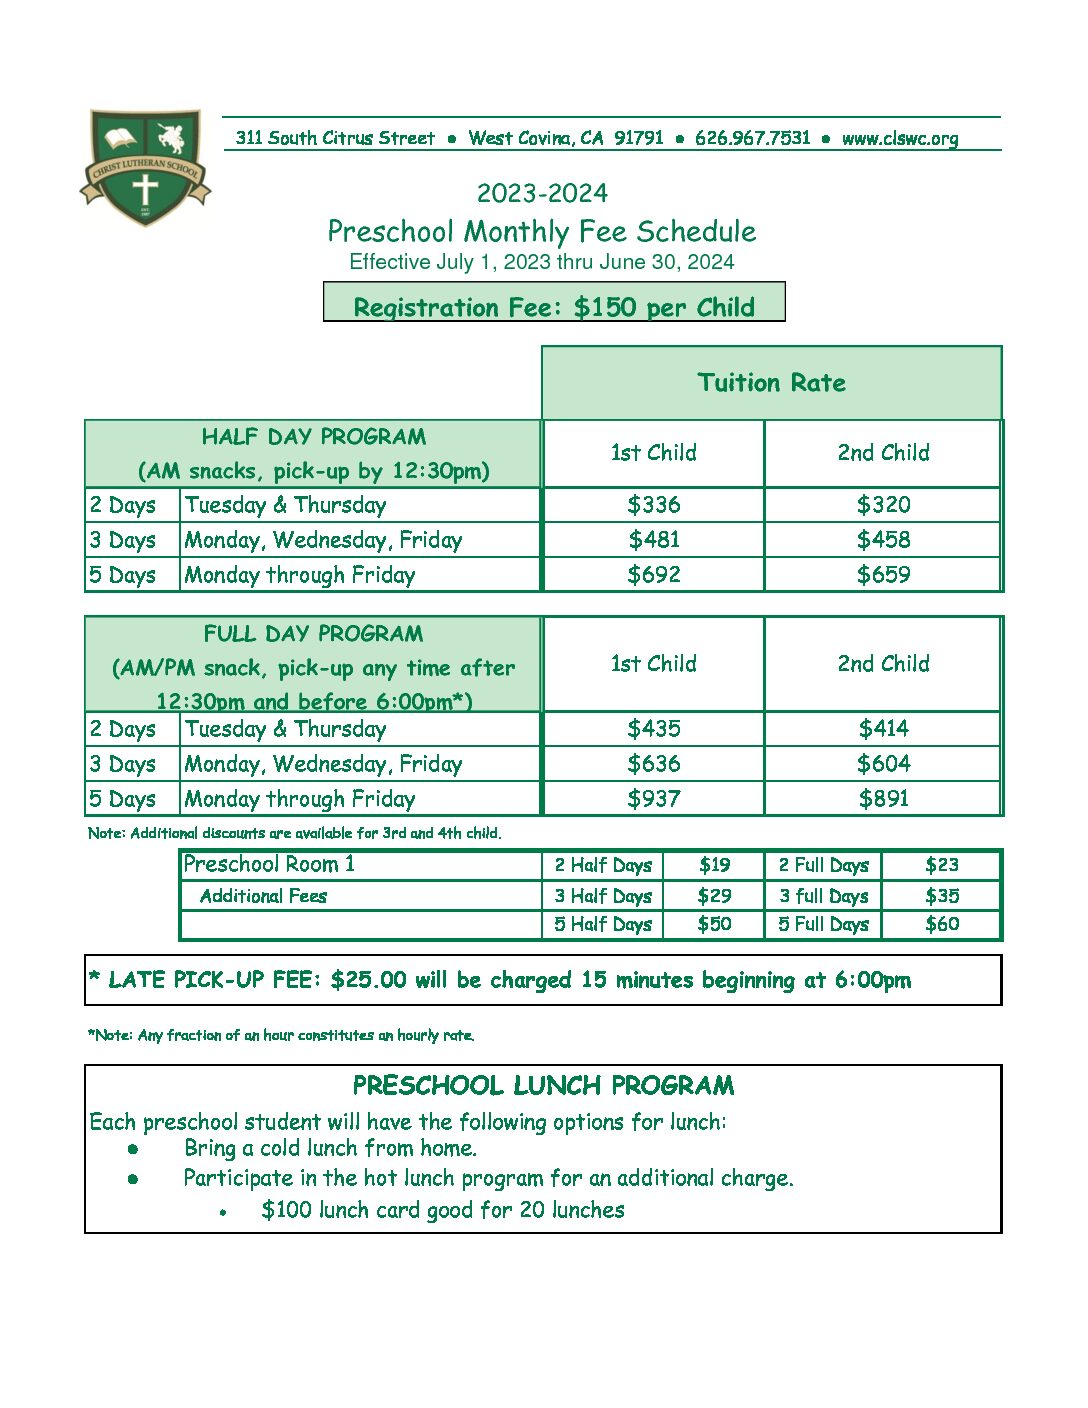 fee-schedule-2024-ps